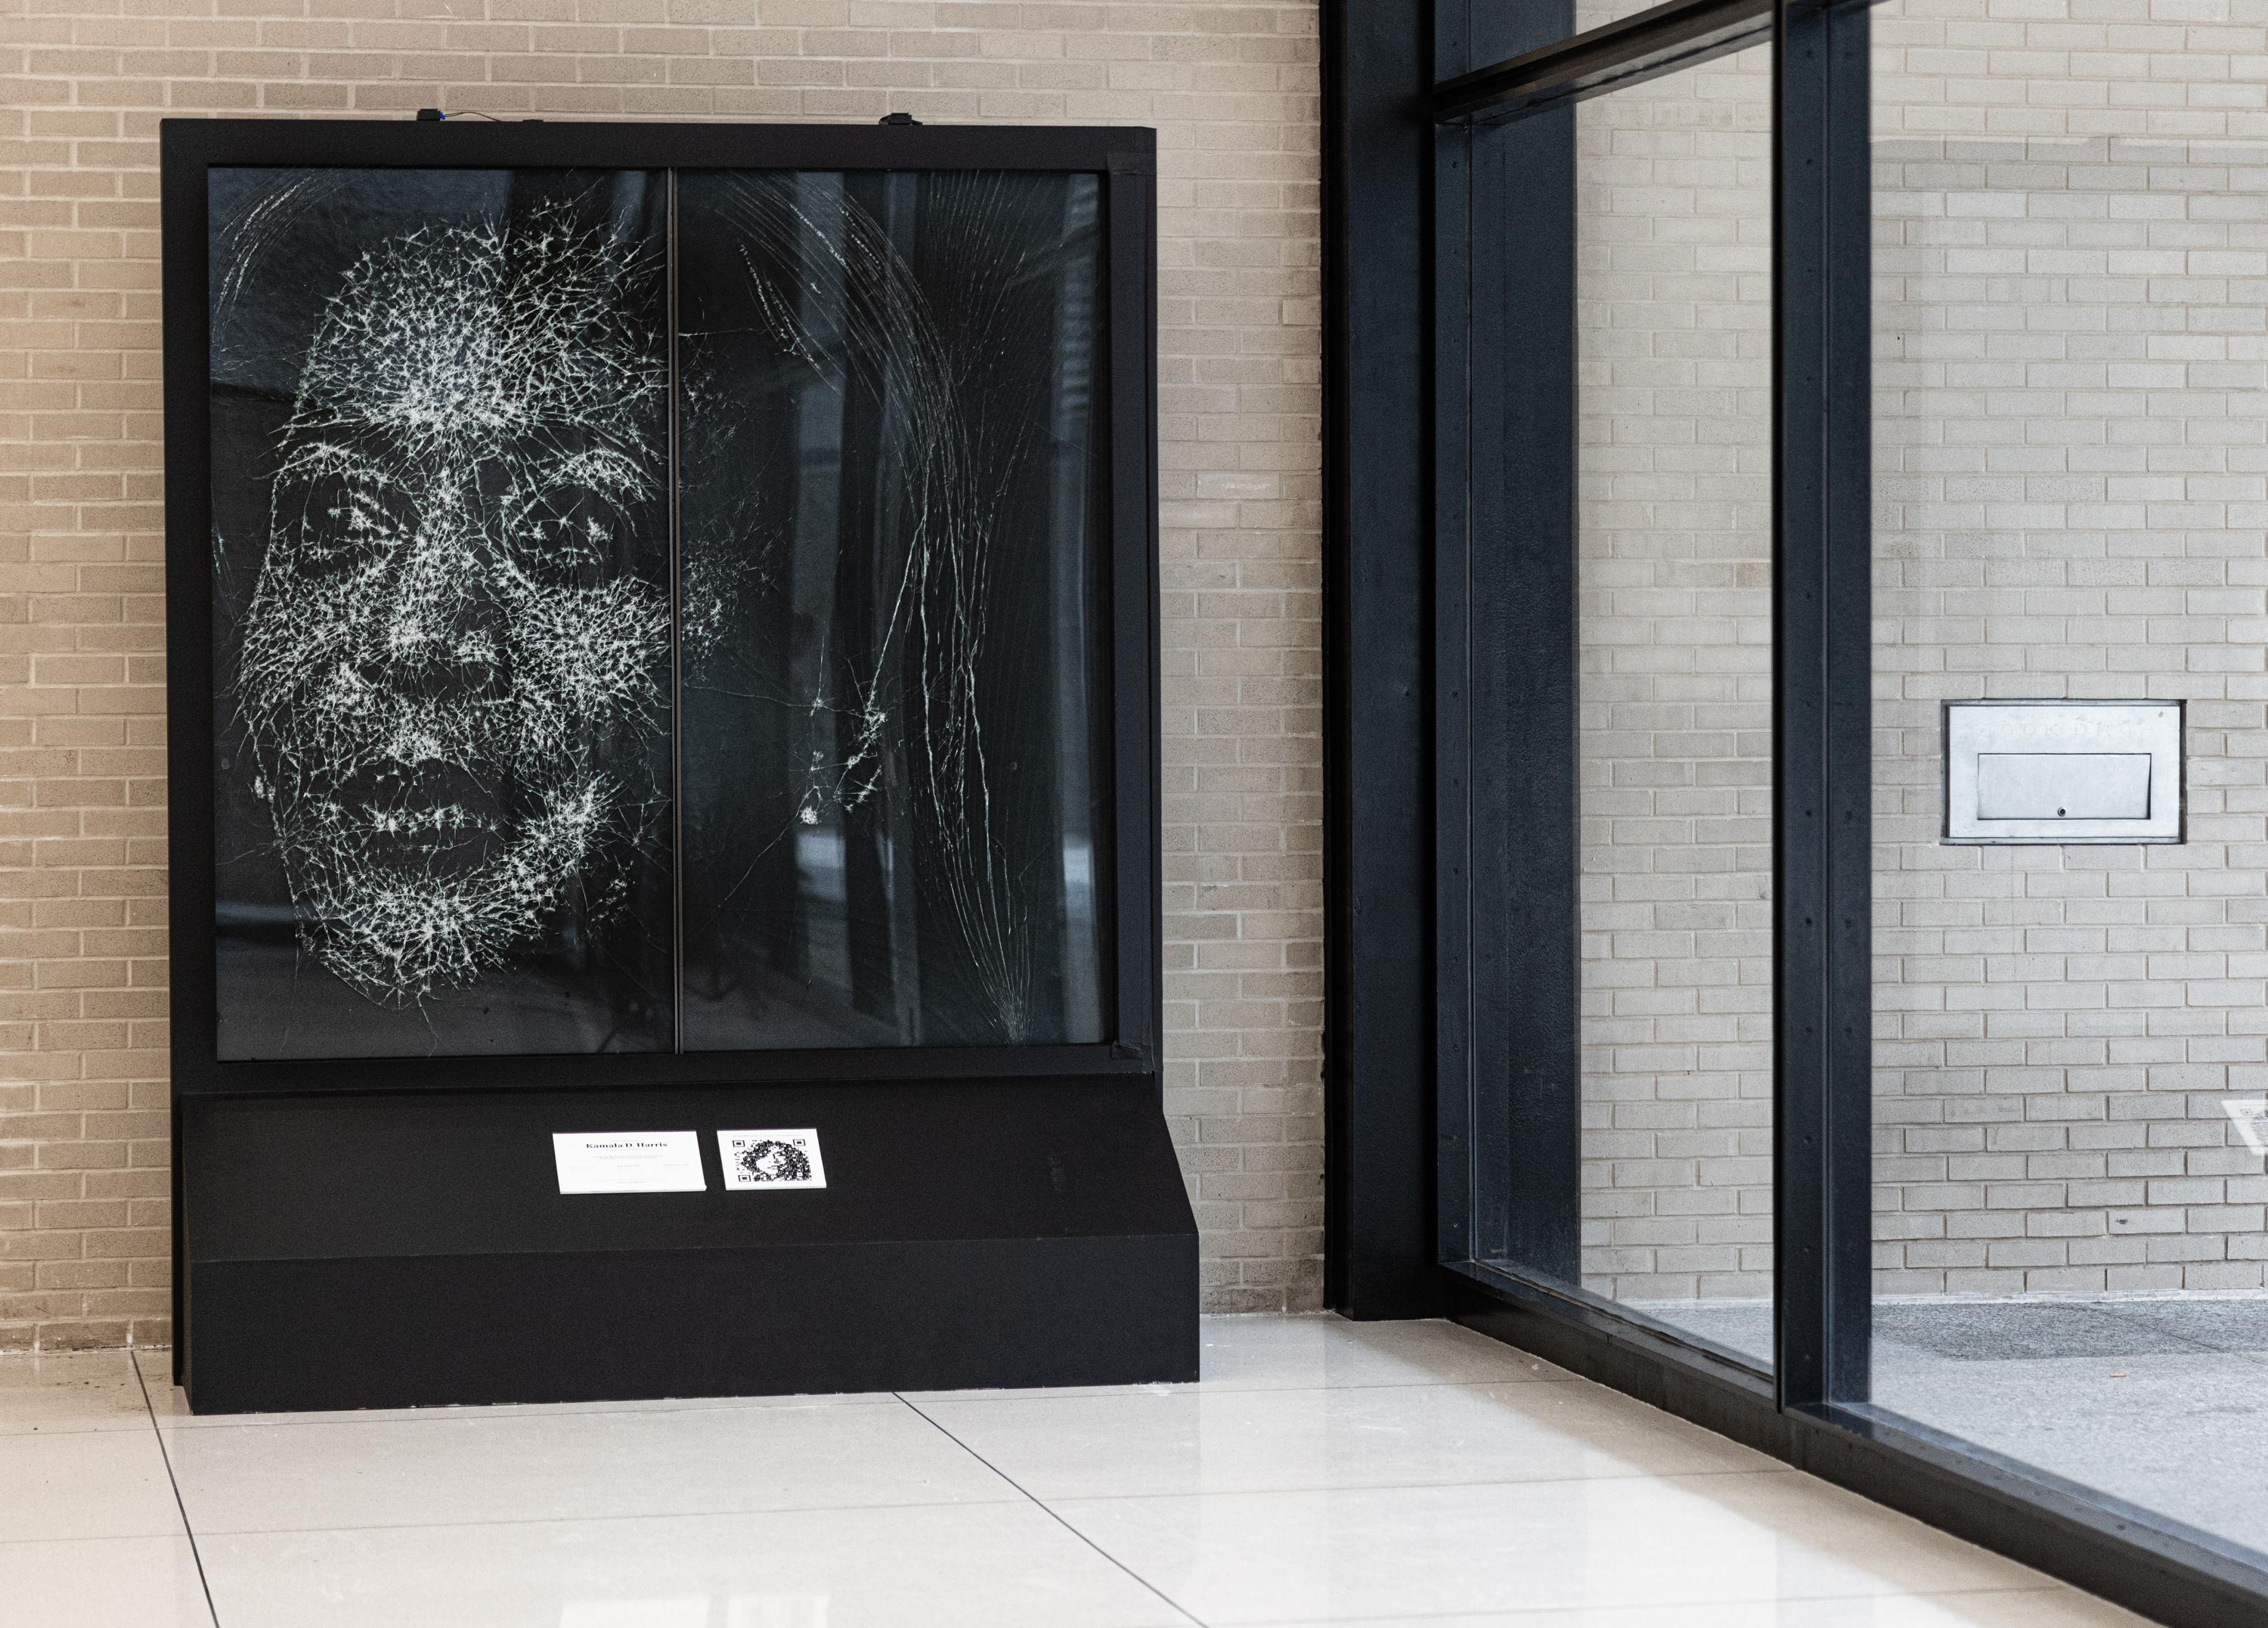 The Glass Ceiling Breaker installation, a portrait of Vice President Kamala Harris' face made of shattered glass.